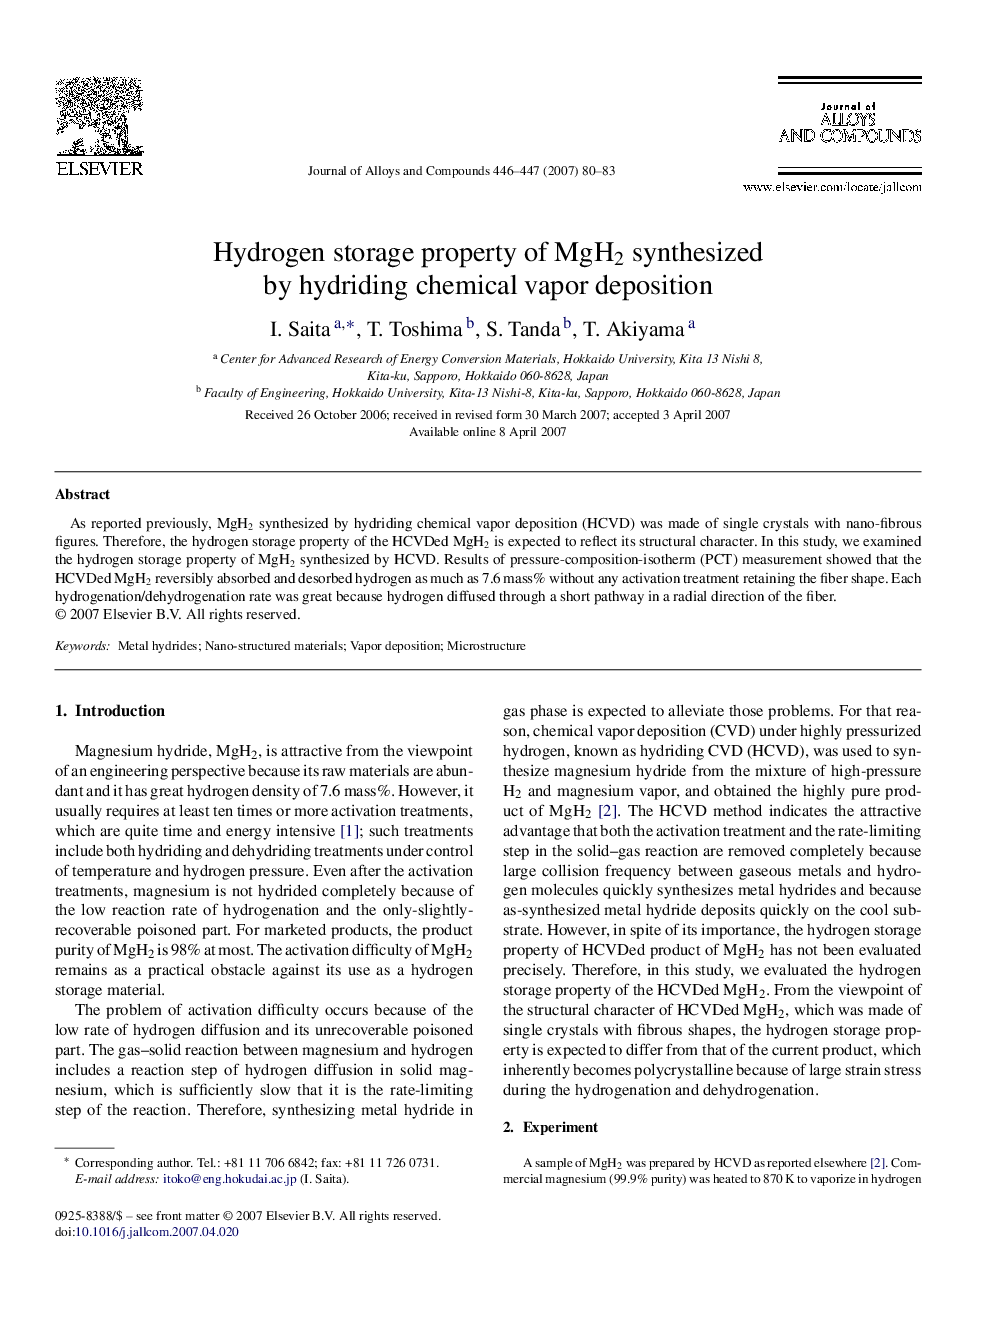 Hydrogen storage property of MgH2 synthesized by hydriding chemical vapor deposition